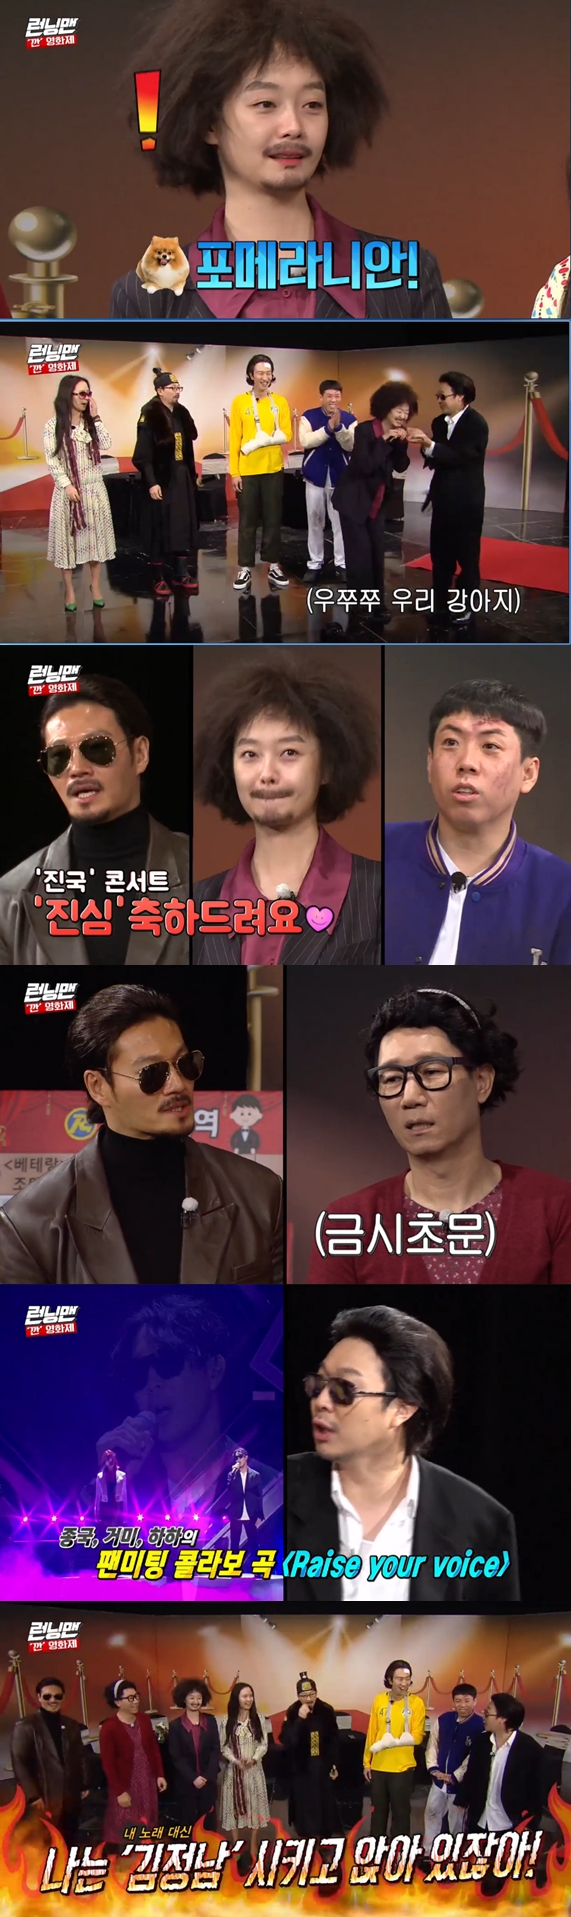 Haha reveals sadness to Kim Jong-kookIn the SBS entertainment program Running Man broadcasted on the night of the 29th, the members turned into new Stillers and showed Running Film Festival Race.Each of the members dressed up for the race theme gathered in one place for the opening; Yoo Jae-Suk announced the recent situation that Kim Jong-kook started the national concert.Haha said, I went to the concert as a guest, but I was really sad. Kim Jong-kook did not hide his regrets that Kim Jong-kook called Alone in the running project.Kim Jong-kook laughed, saying, I told him to be with Haha around, but he just called Alone.Haha said, If you do, why did you call me?